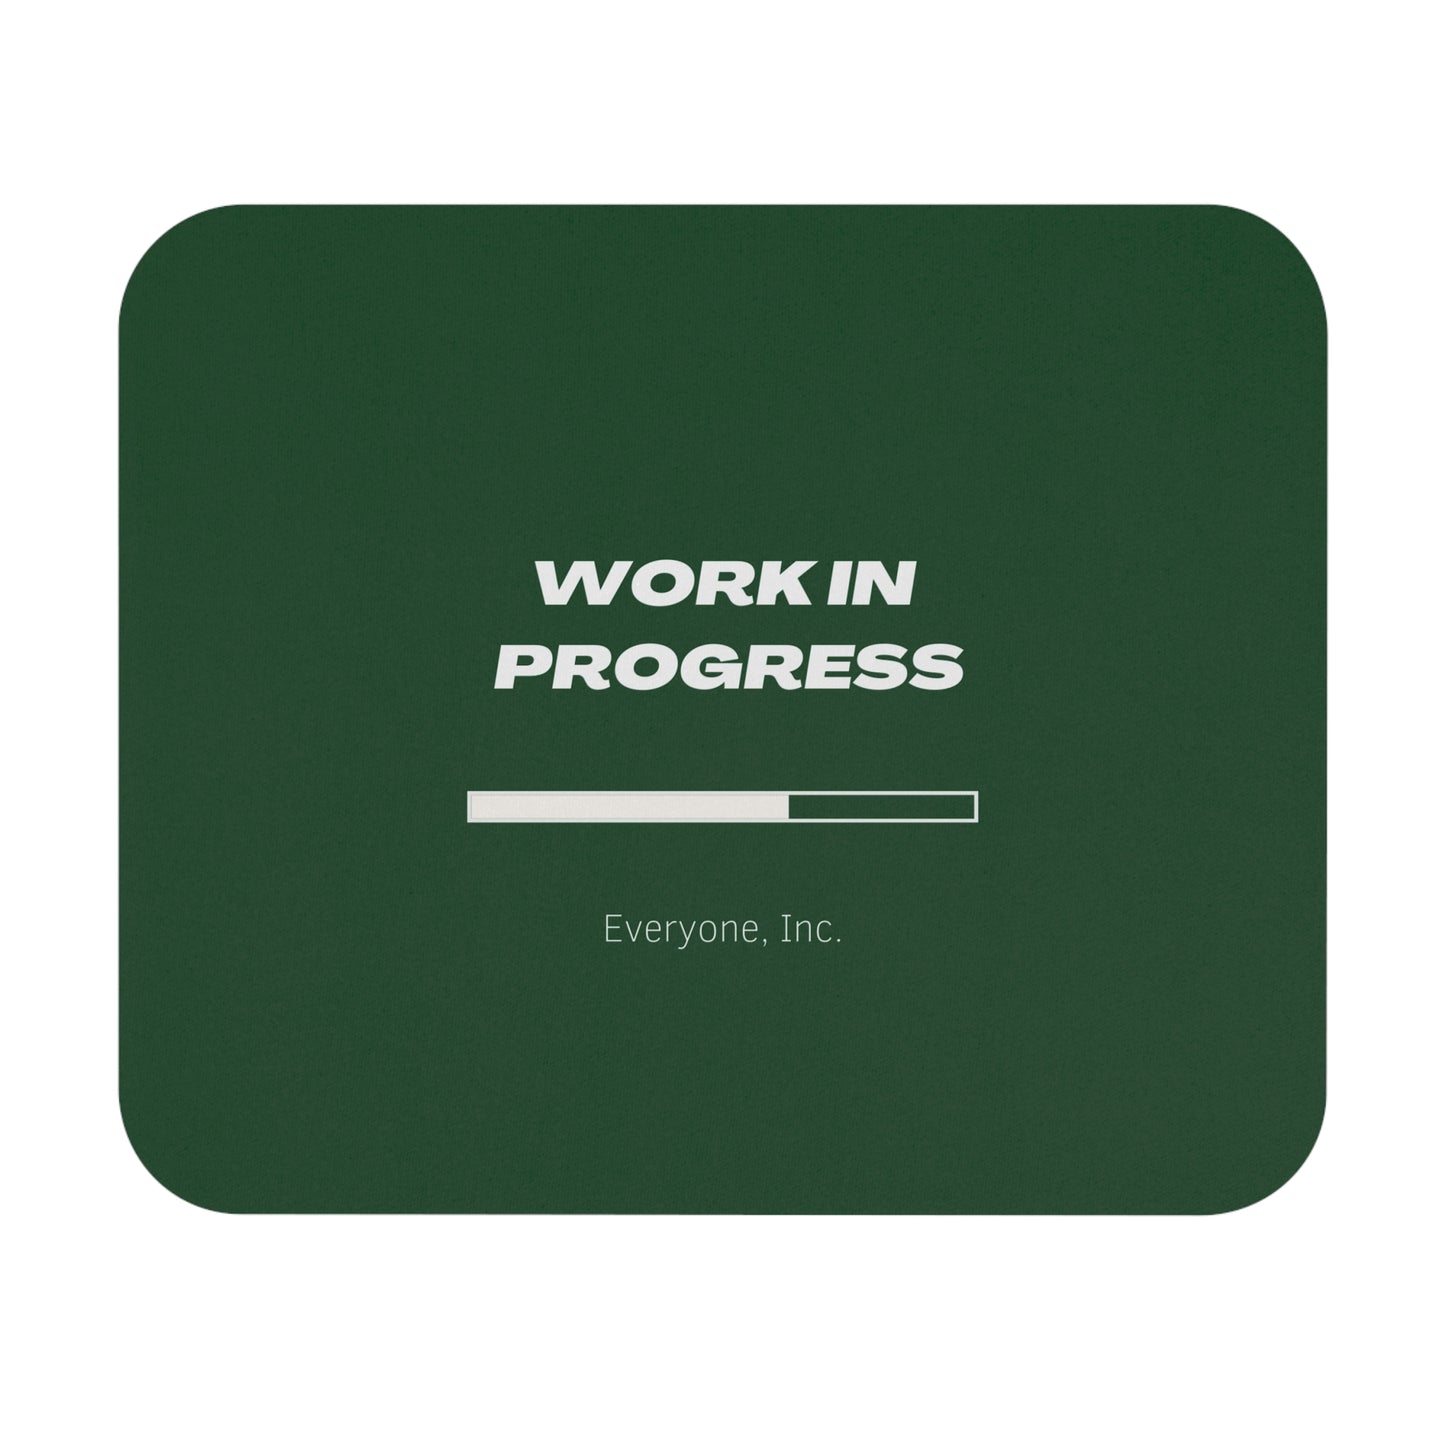 "Work In Progress" Mouse Pad